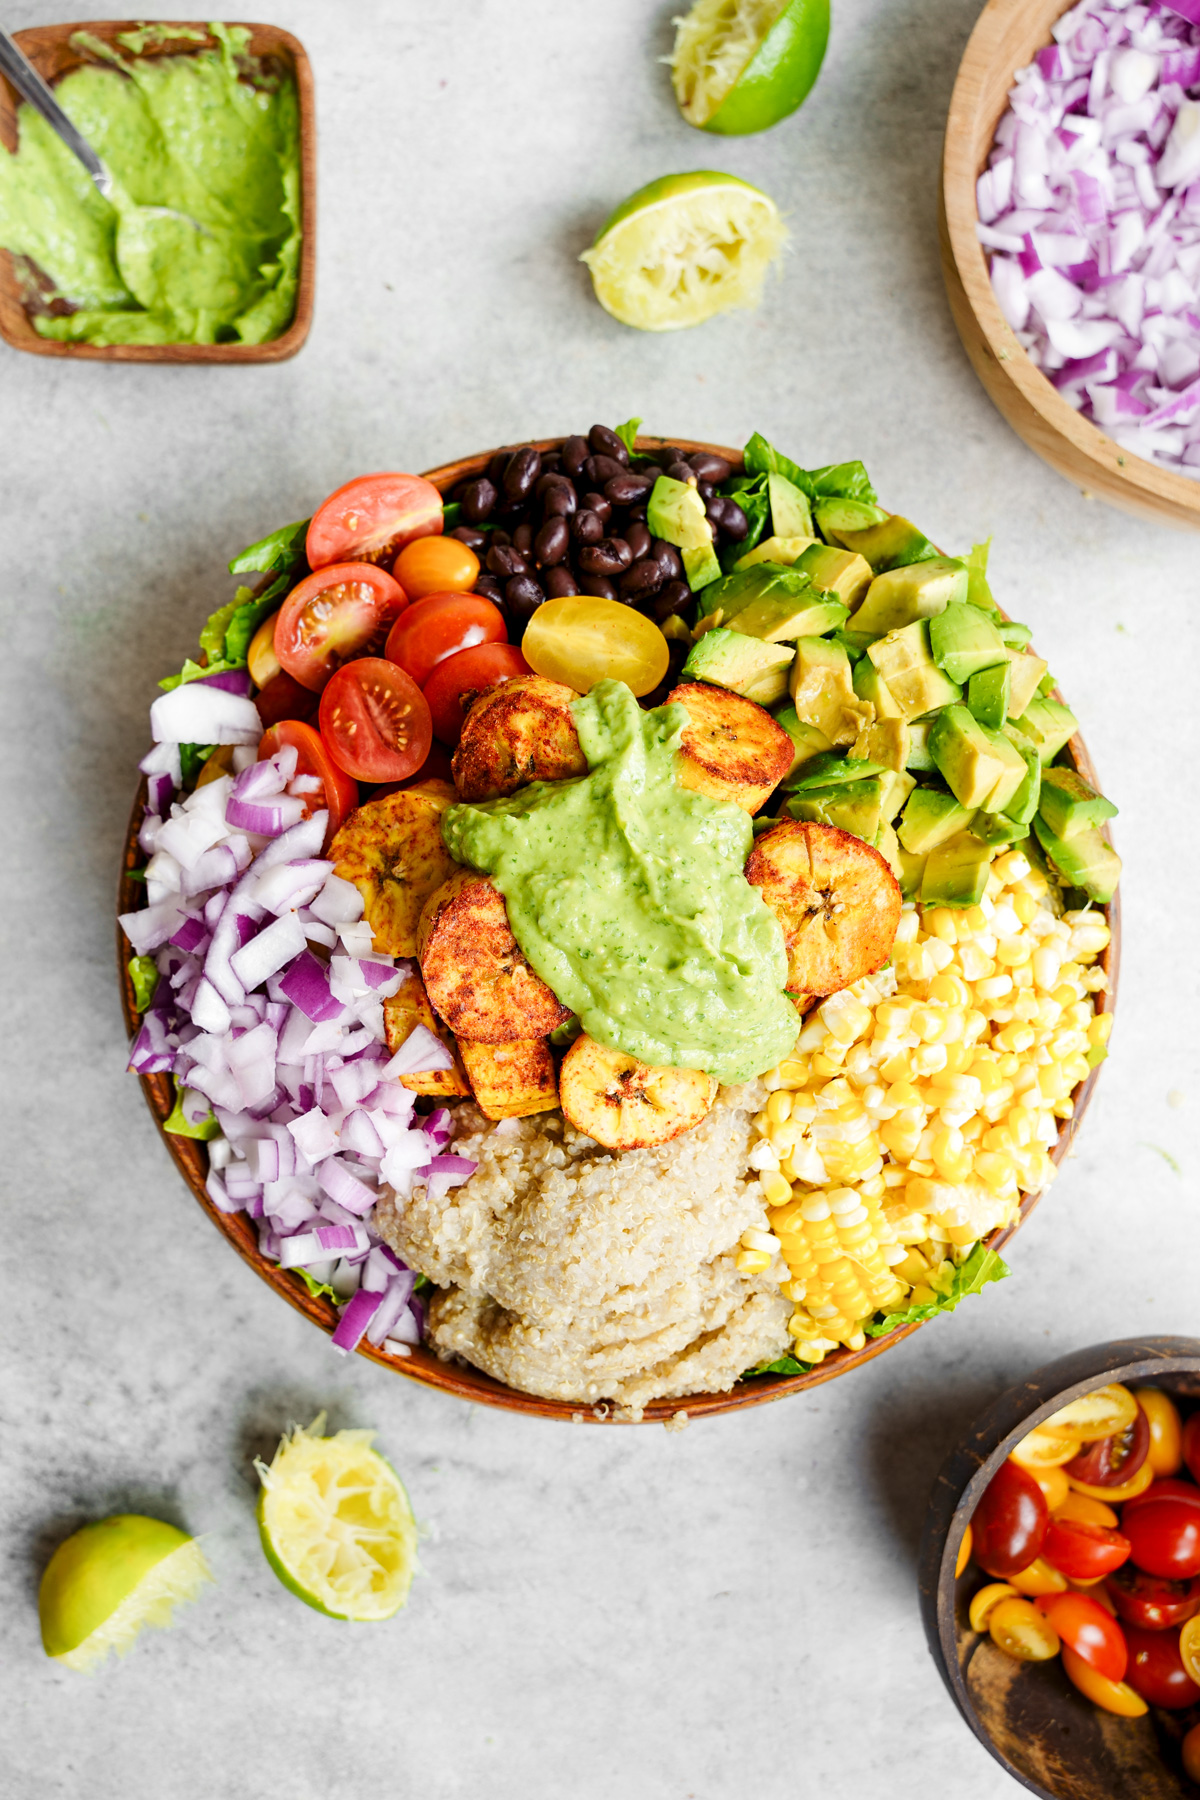 the healthy vegan bowl filled with rainbow vegetables